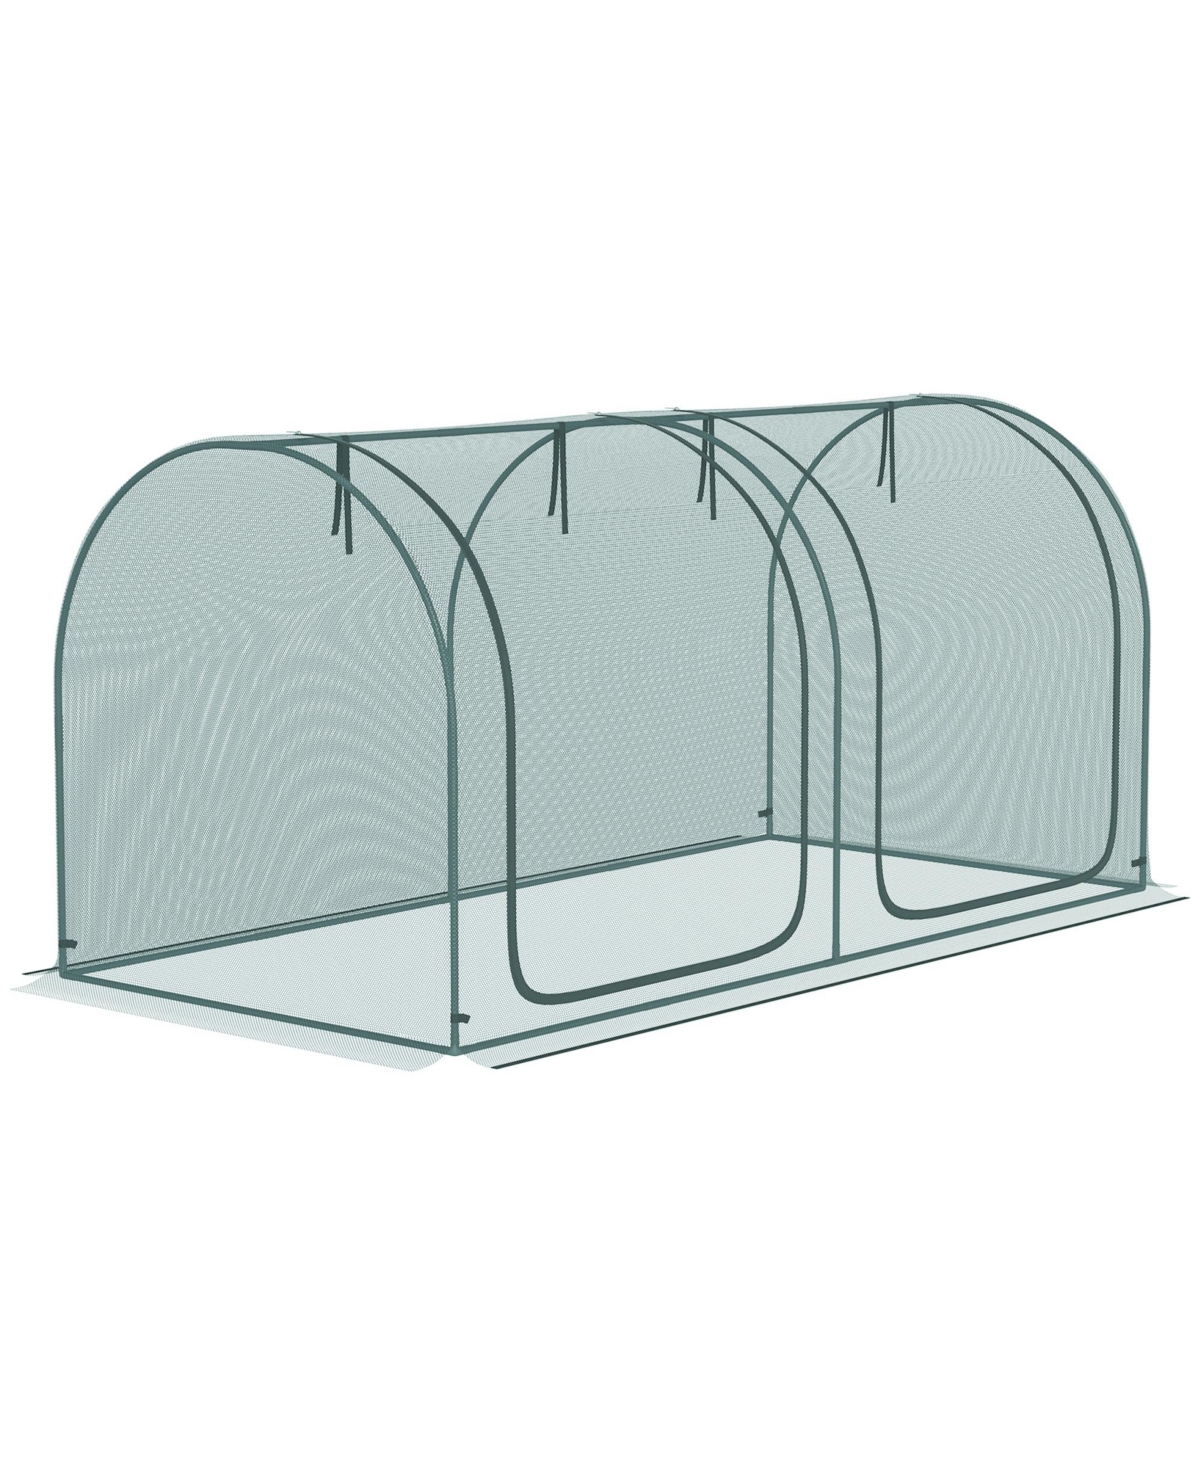 8' x 4' Crop Cage, Plant Protection Tent with Two Zippered Doors, Storage Bag and 4 Ground Stakes, for Garden, Yard, Lawn, Green - Green